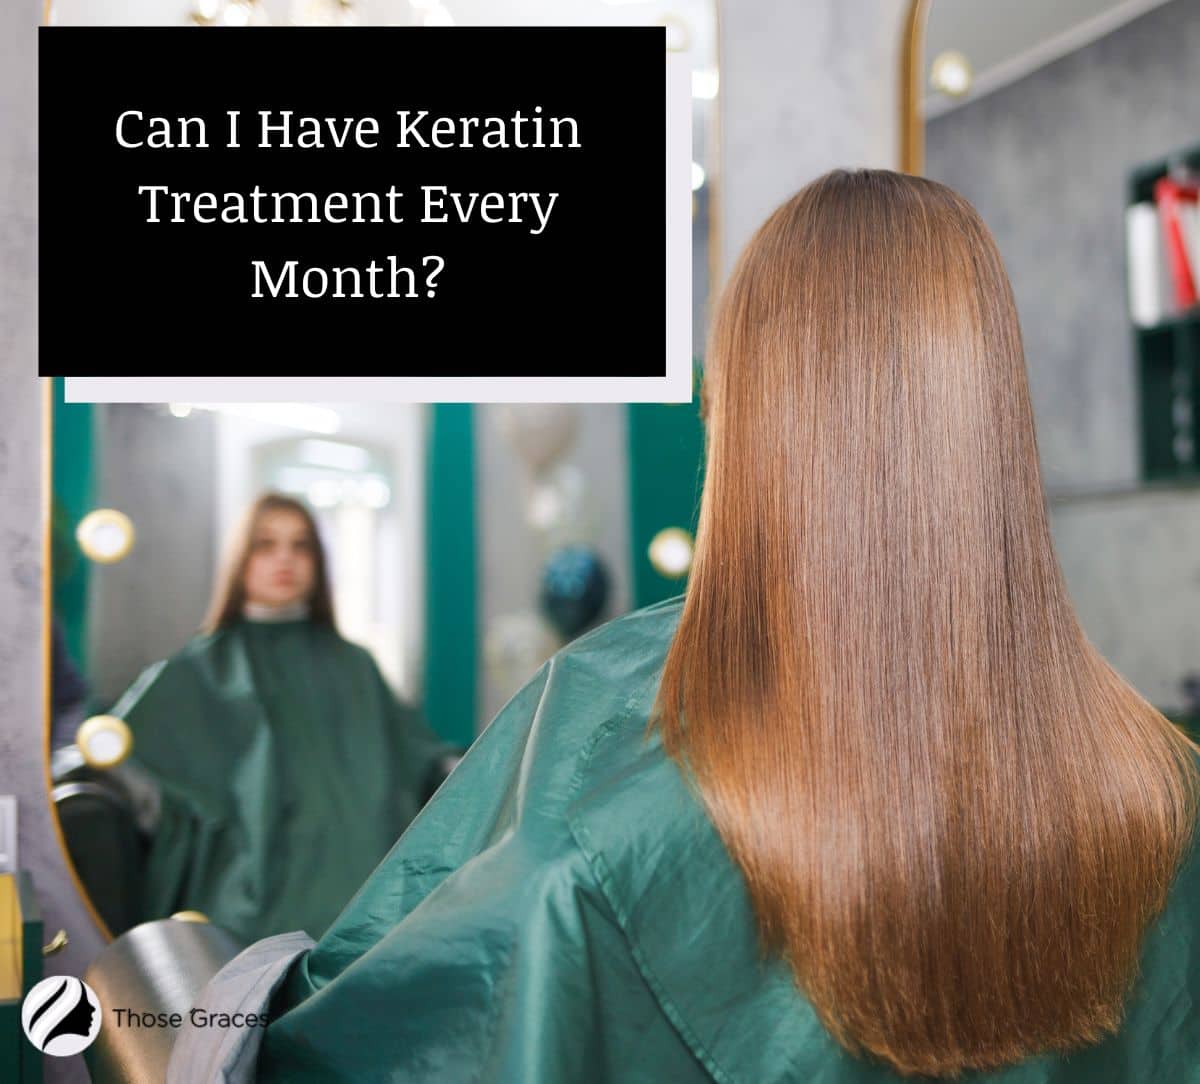 lady with long straight hair achieved through keratin treatment